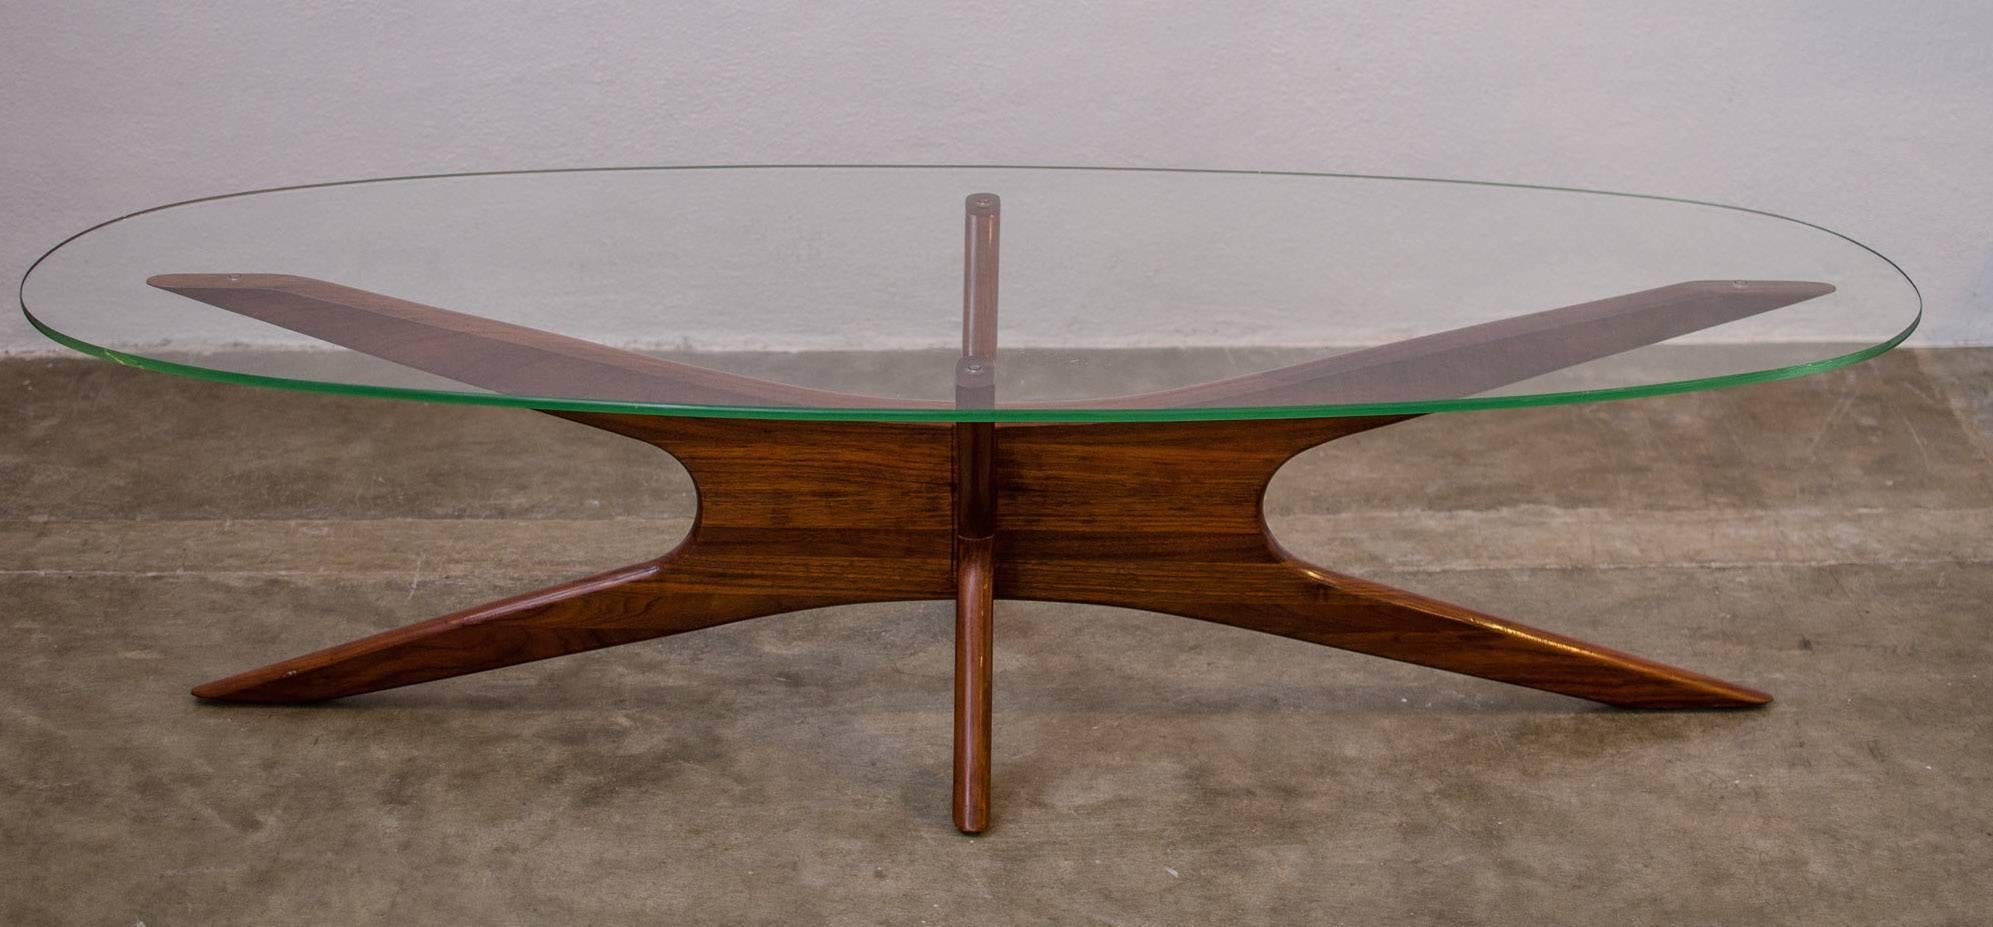 A wonderful Adrian Pearsall 'Jacks' coffee table for craft. The table has a walnut base and oval glass top. The piece is in excellent condition.